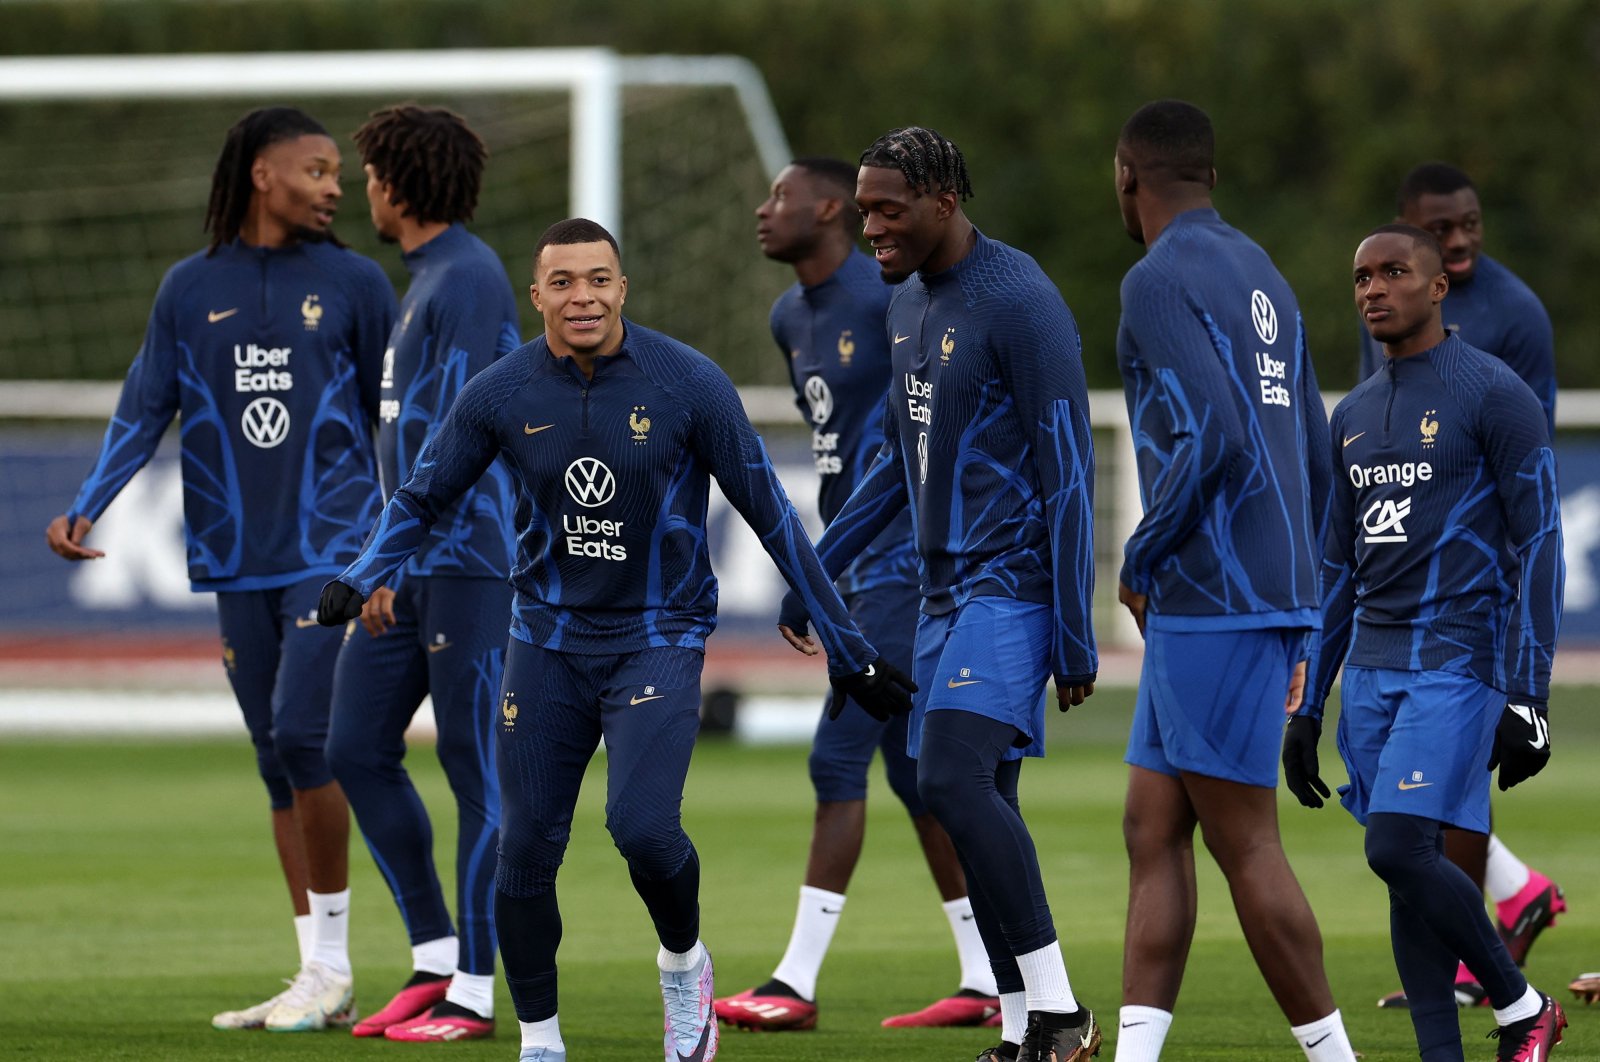 France&#039;s forward Kylian Mbappe (C) smiles during a training session as part of the team&#039;s preparation for the upcoming UEFA Euro 2024 football tournament qualifying matches, Clairefontaine-en-Yvelines, France, March 21, 2023. (AFP Photo)